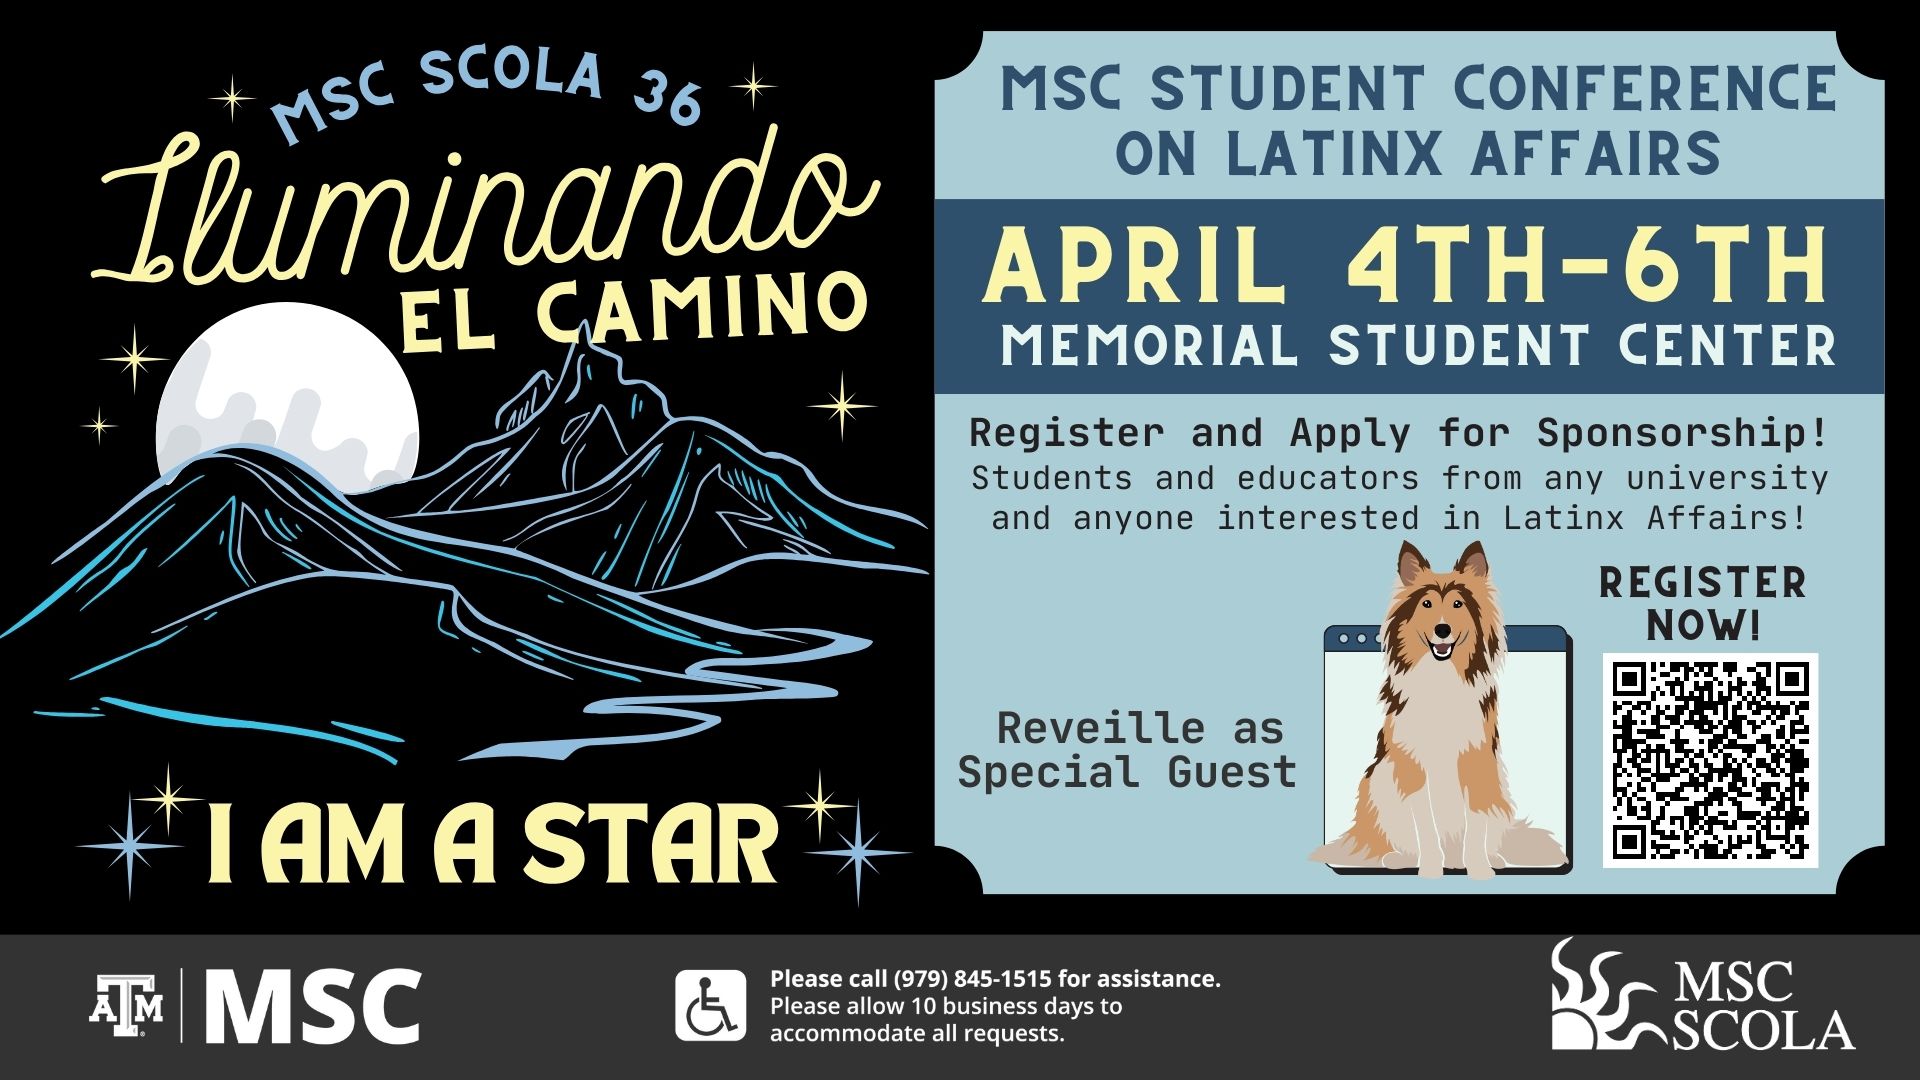 MSC Student Conference on Latinx Affairs 36 presents Iluminando el camino, I am a star. April 4 to 6 at the Memorial Student Center. Register and apply for sponsorship! Students and educators from any university and anyone interested in Latinx Affairs! We will have Reveille as a special guest. Register now! https://tamu.estore.flywire.com/products/msc-scola-36-conference----tamu-students-164005